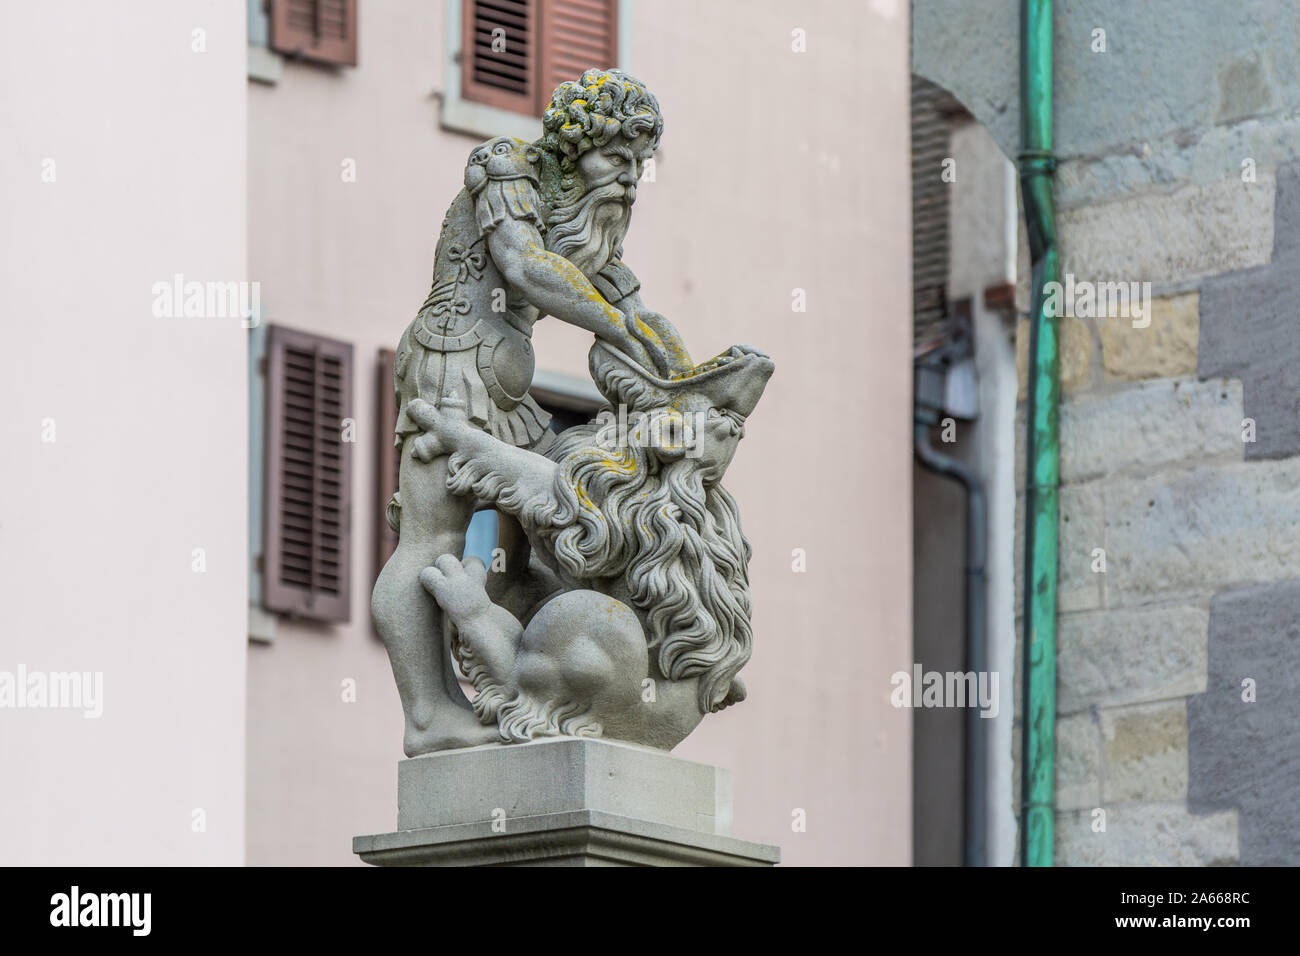 LONDON, UK - DECEMBER 20: Statue of Samson slaying a Philistine, by  Giambologna, at the Victoria and Albert museum's Medieval an Stock Photo -  Alamy